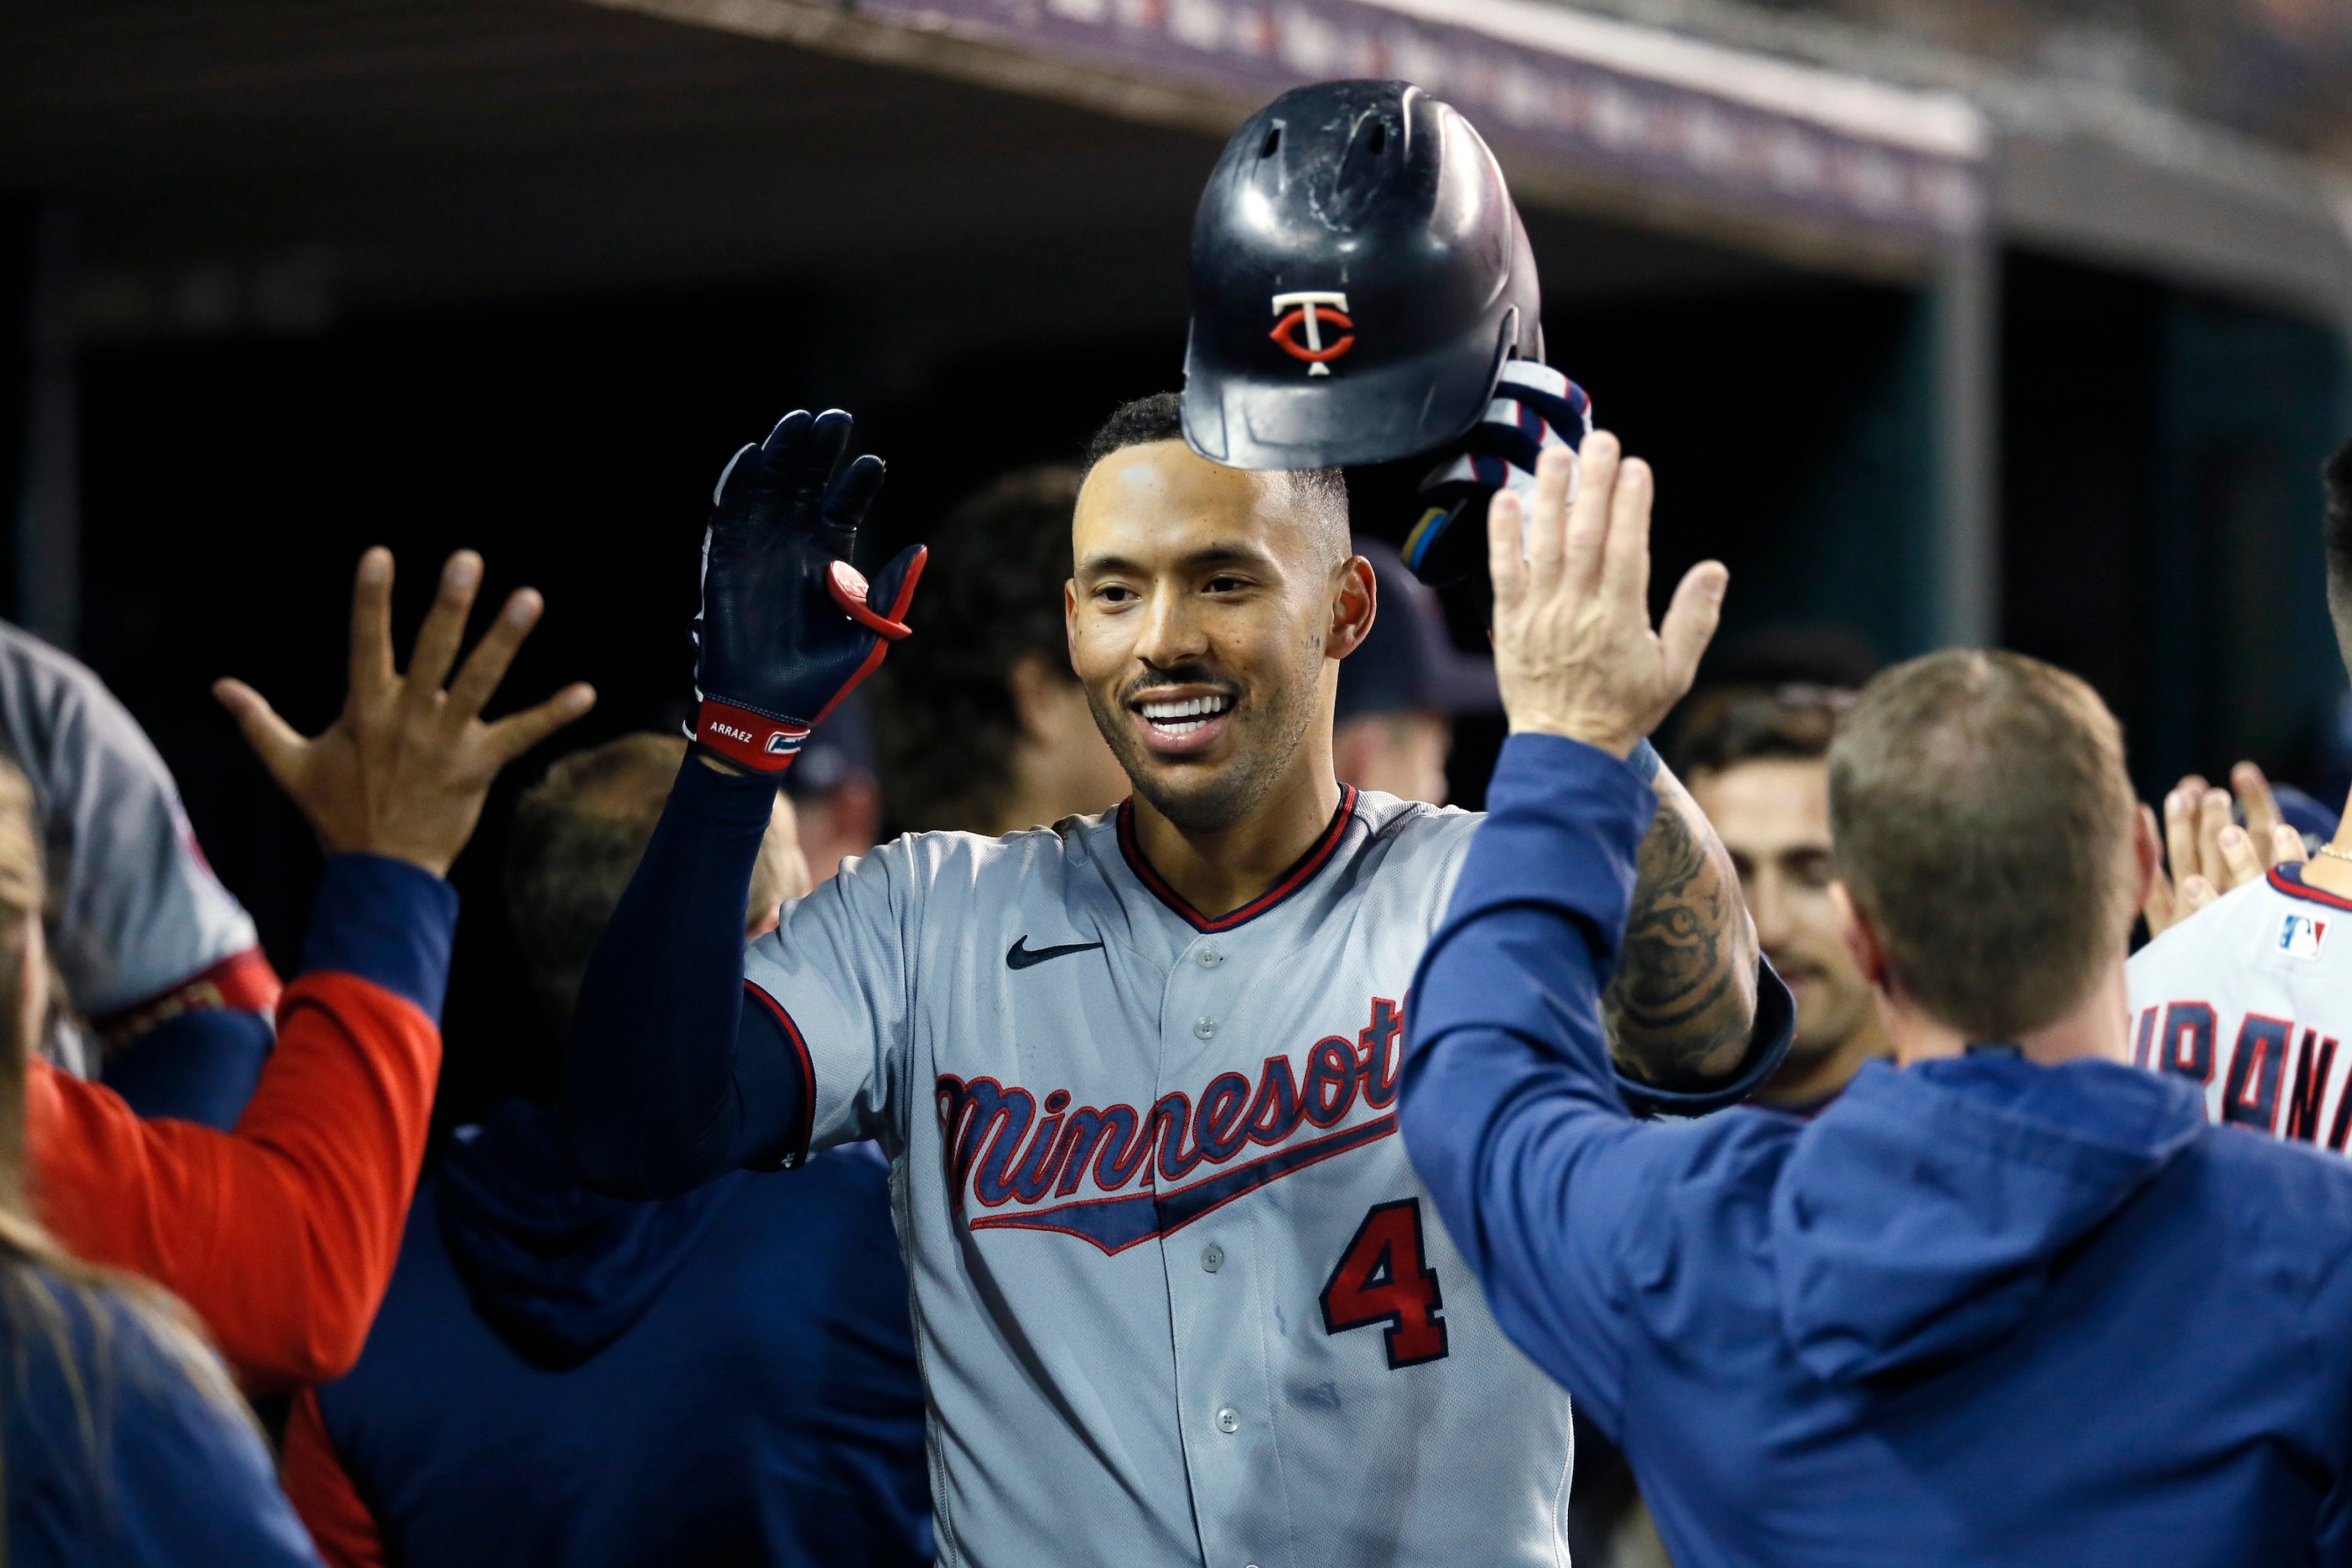 Carlos Correa congratulated by his former, and now future, Minnesota Twins teammates after a September 2022 home run.